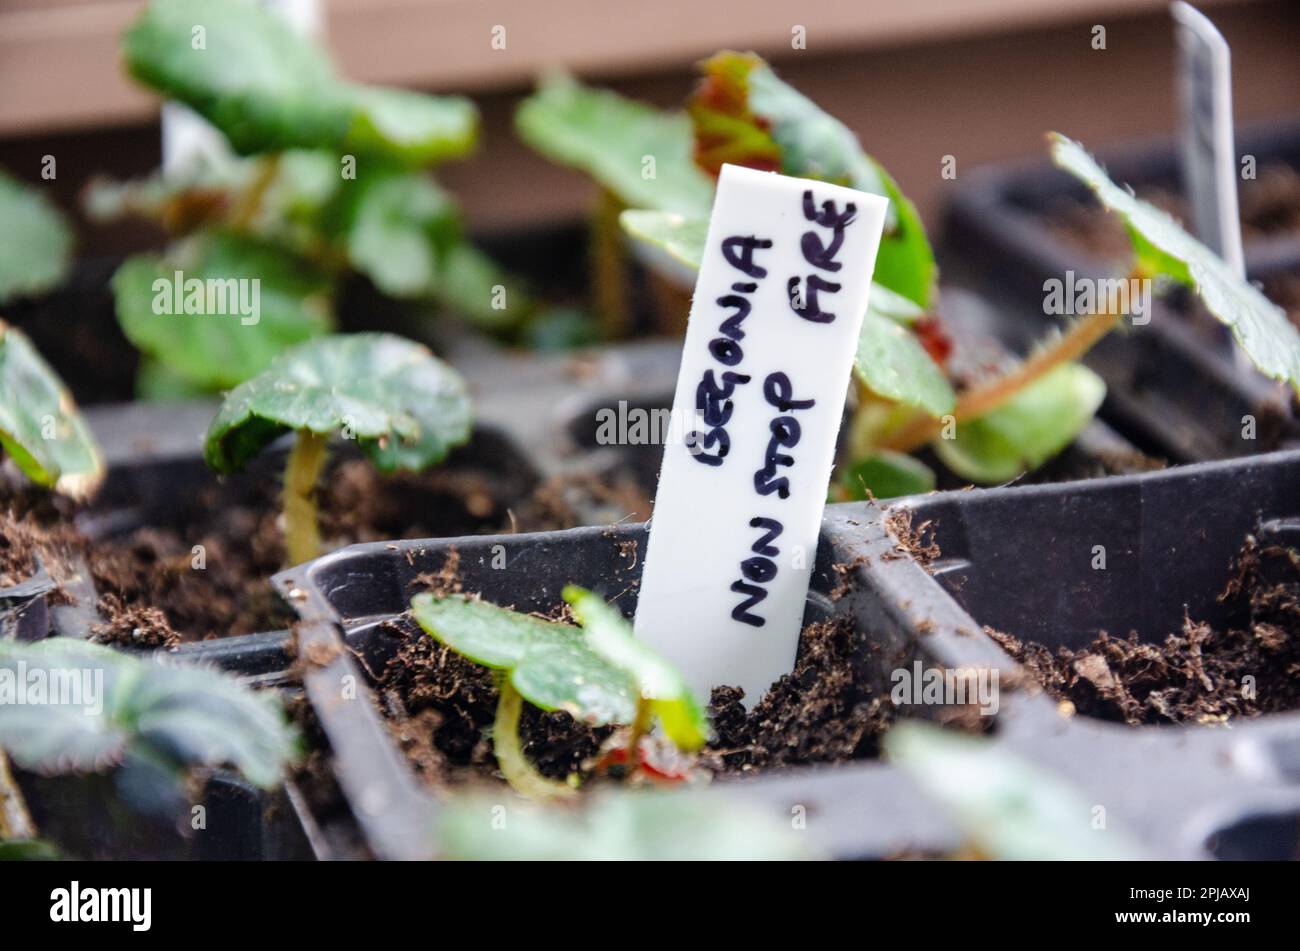 Close up view of begonia seedlings growing in a seed tray with plastic labels made from old margarine tubs. Stock Photo